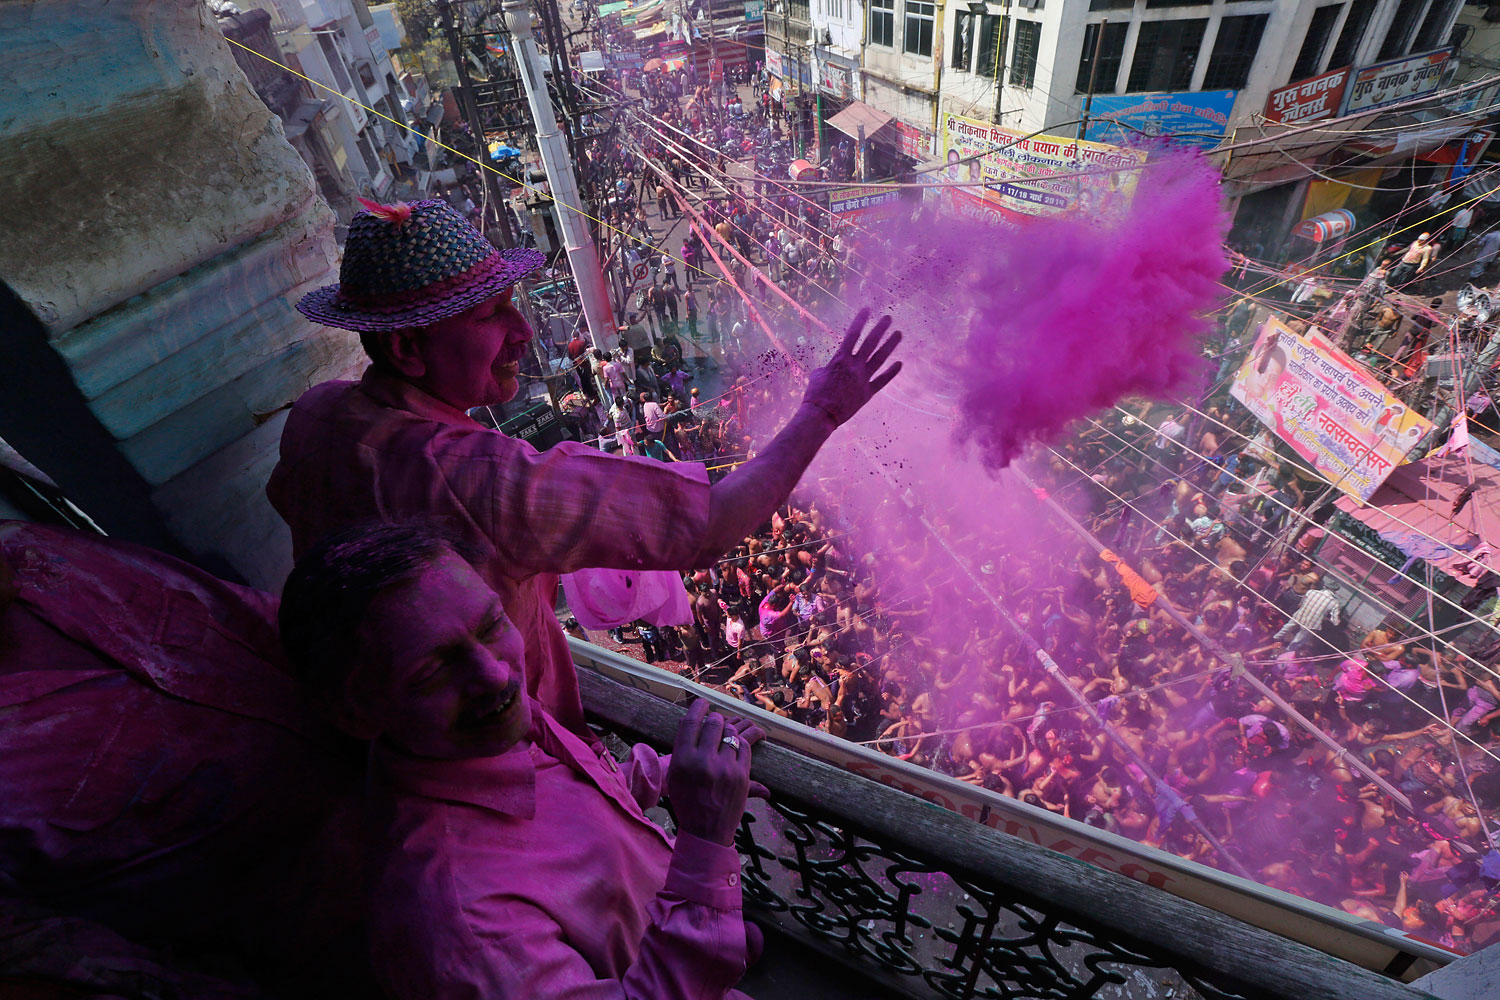 Indians throw colored powder and sprinkle water as they dance during celebrations marking Holi, the Hindu festival of colors, in Allahabad, India, March 17, 2014.